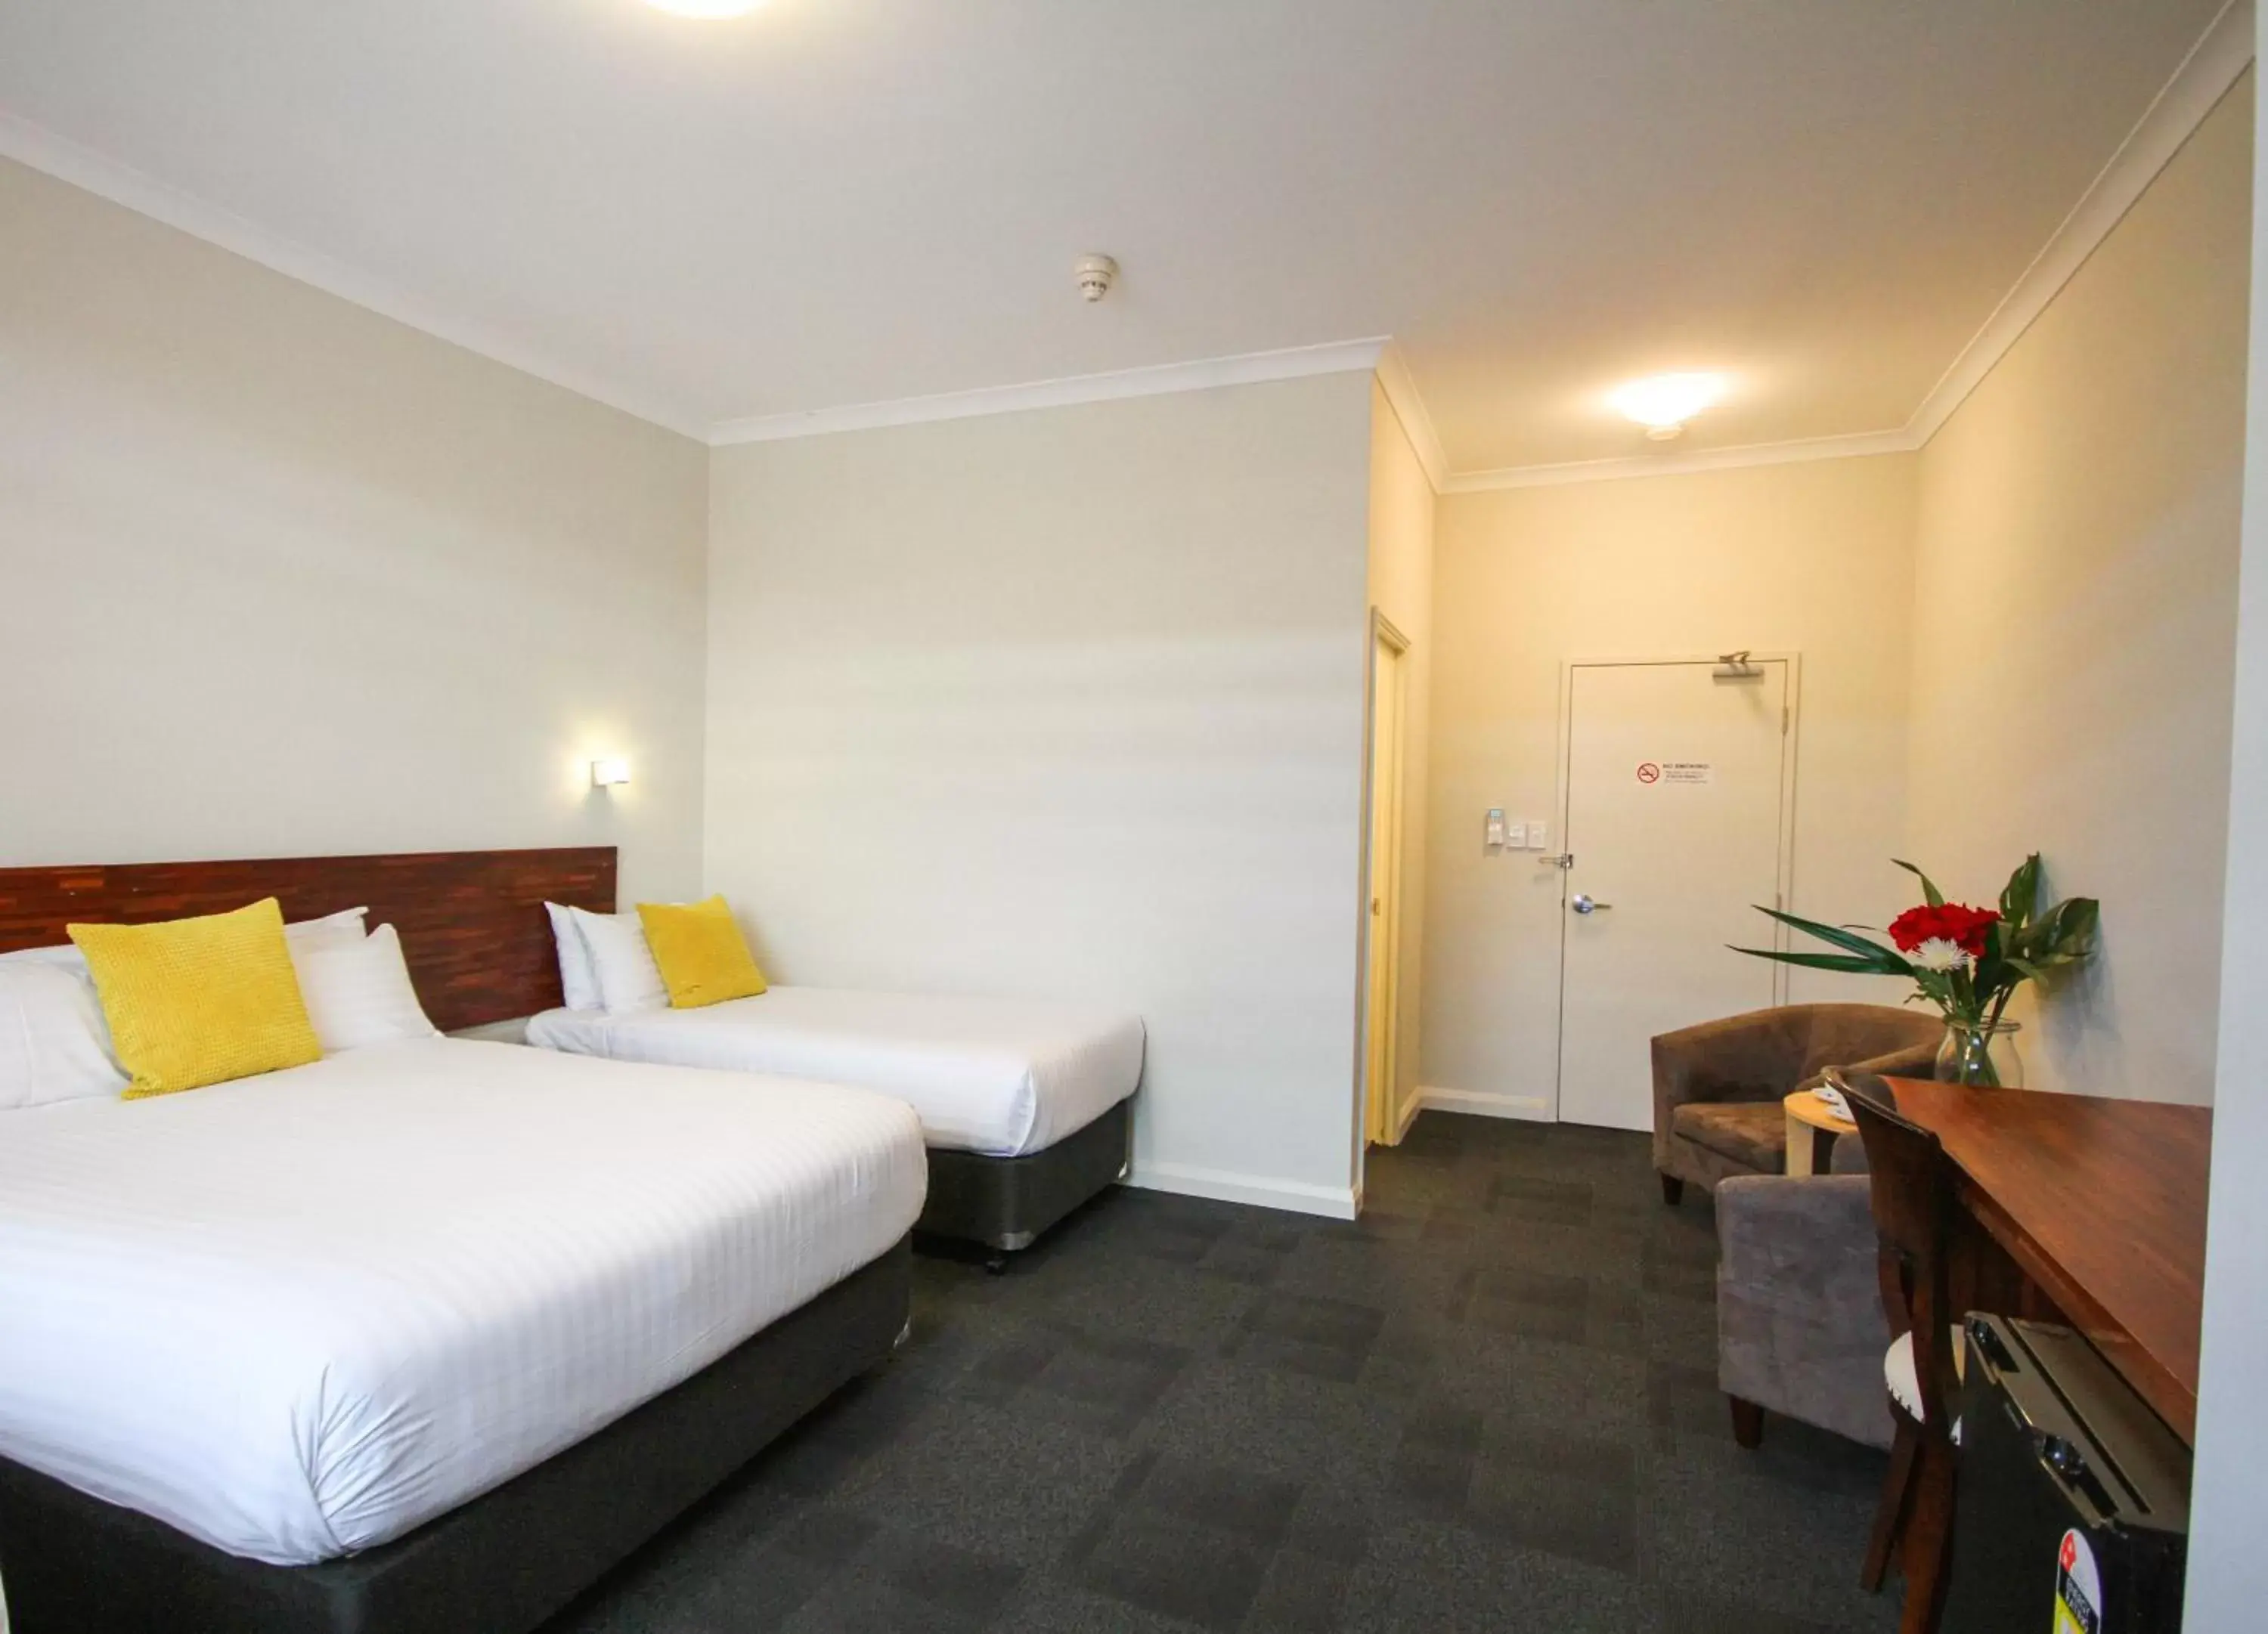 Property building, Bed in Gallery Hotel